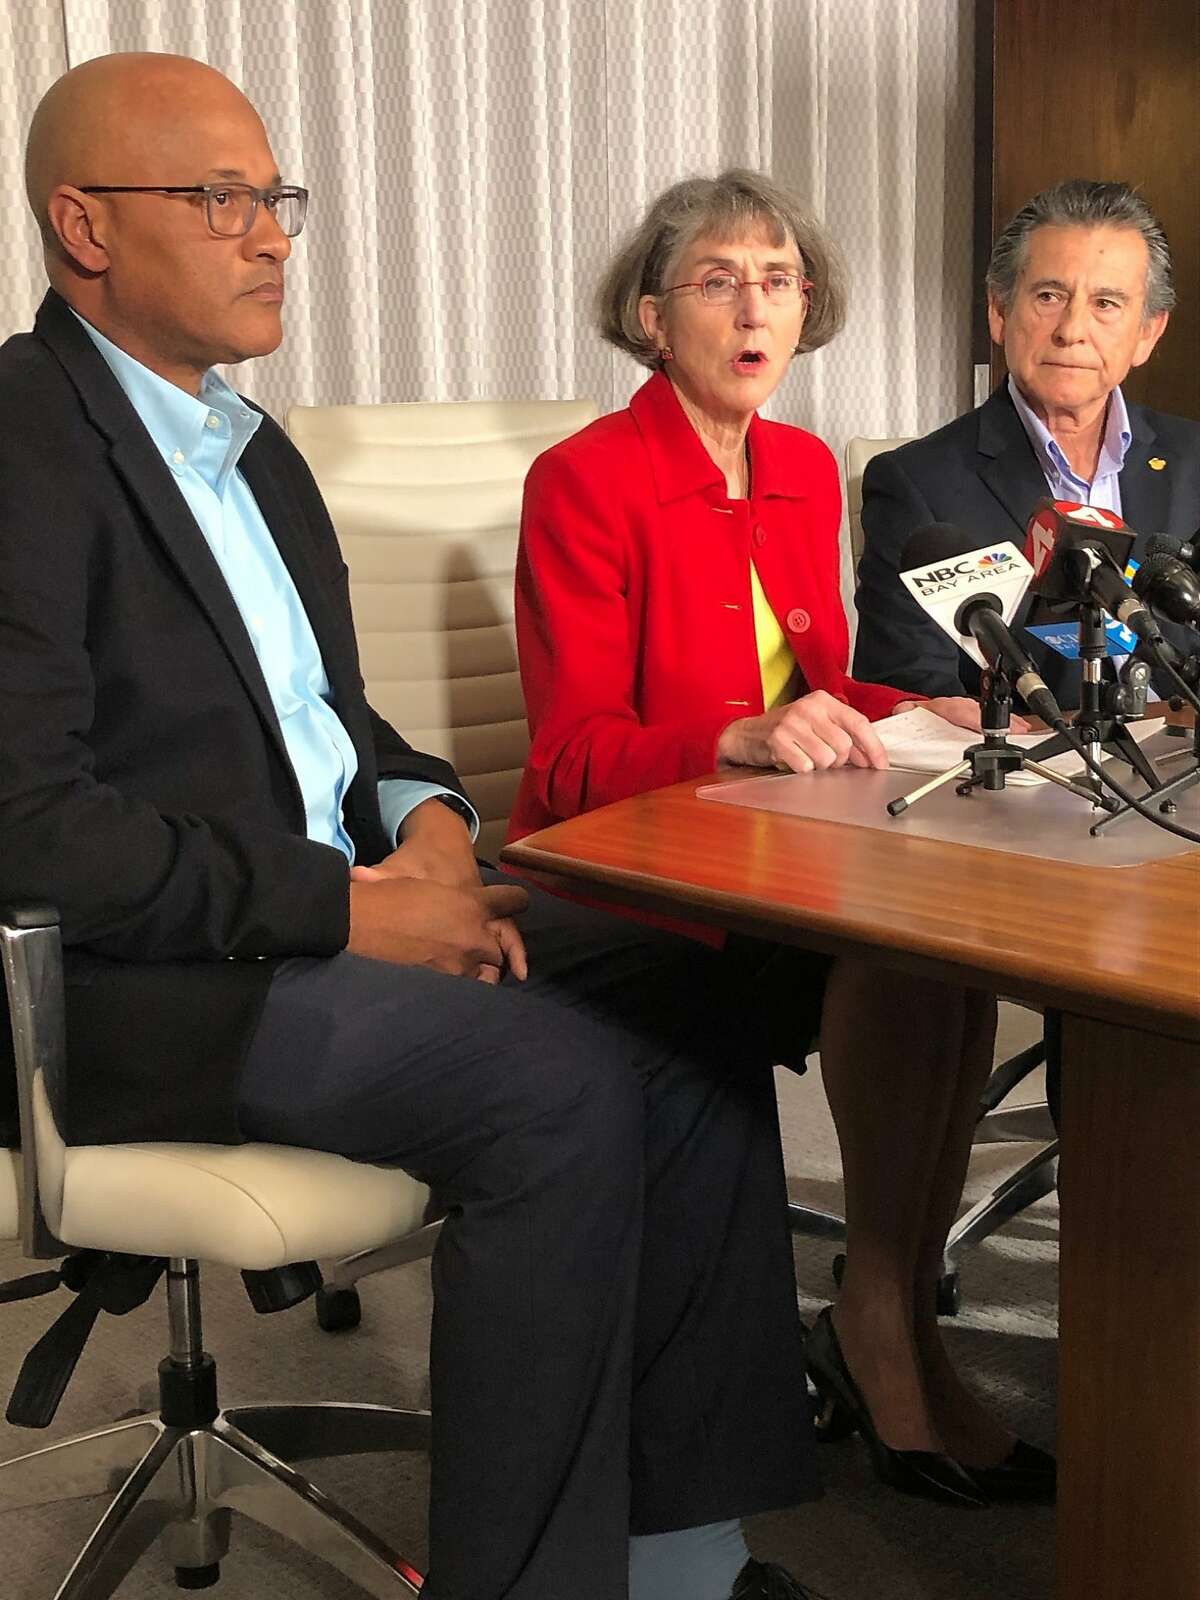 Flanked by former Oakland Police Chief Howard Jordan and Oakland city Councilman Noel Gallo, fired Oakland police Chief Anne Kirkpatrick calls for the removal of Oakland police monitor Robert Warshaw at a downtown Oakland press conference on Thursday, March 5, 2020.